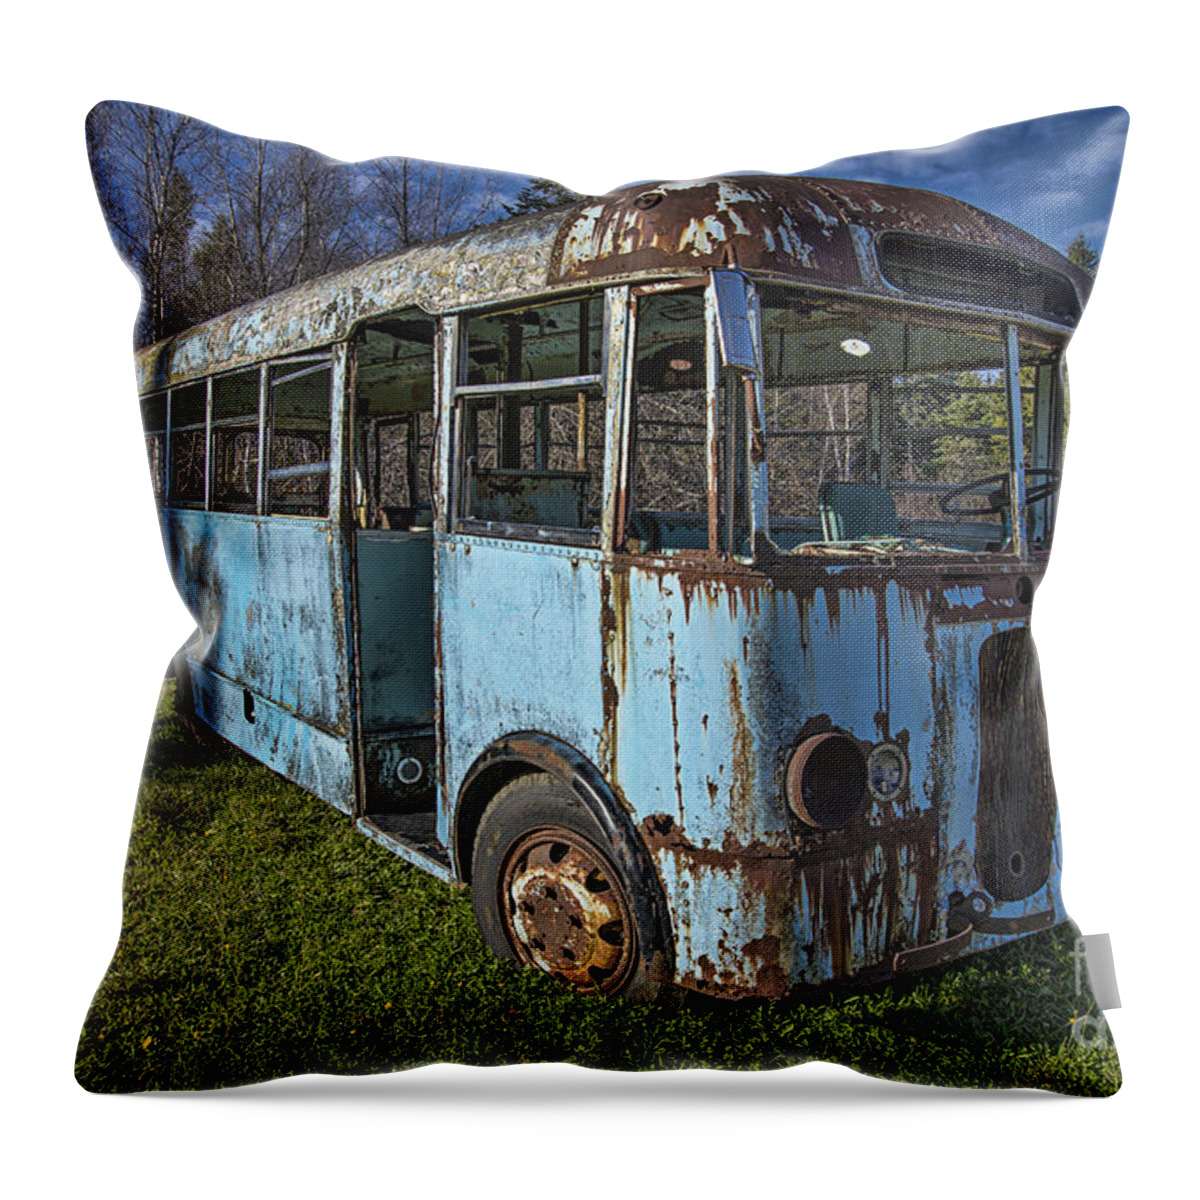 City Bus Throw Pillow featuring the photograph 1950's City Bus by Alana Ranney